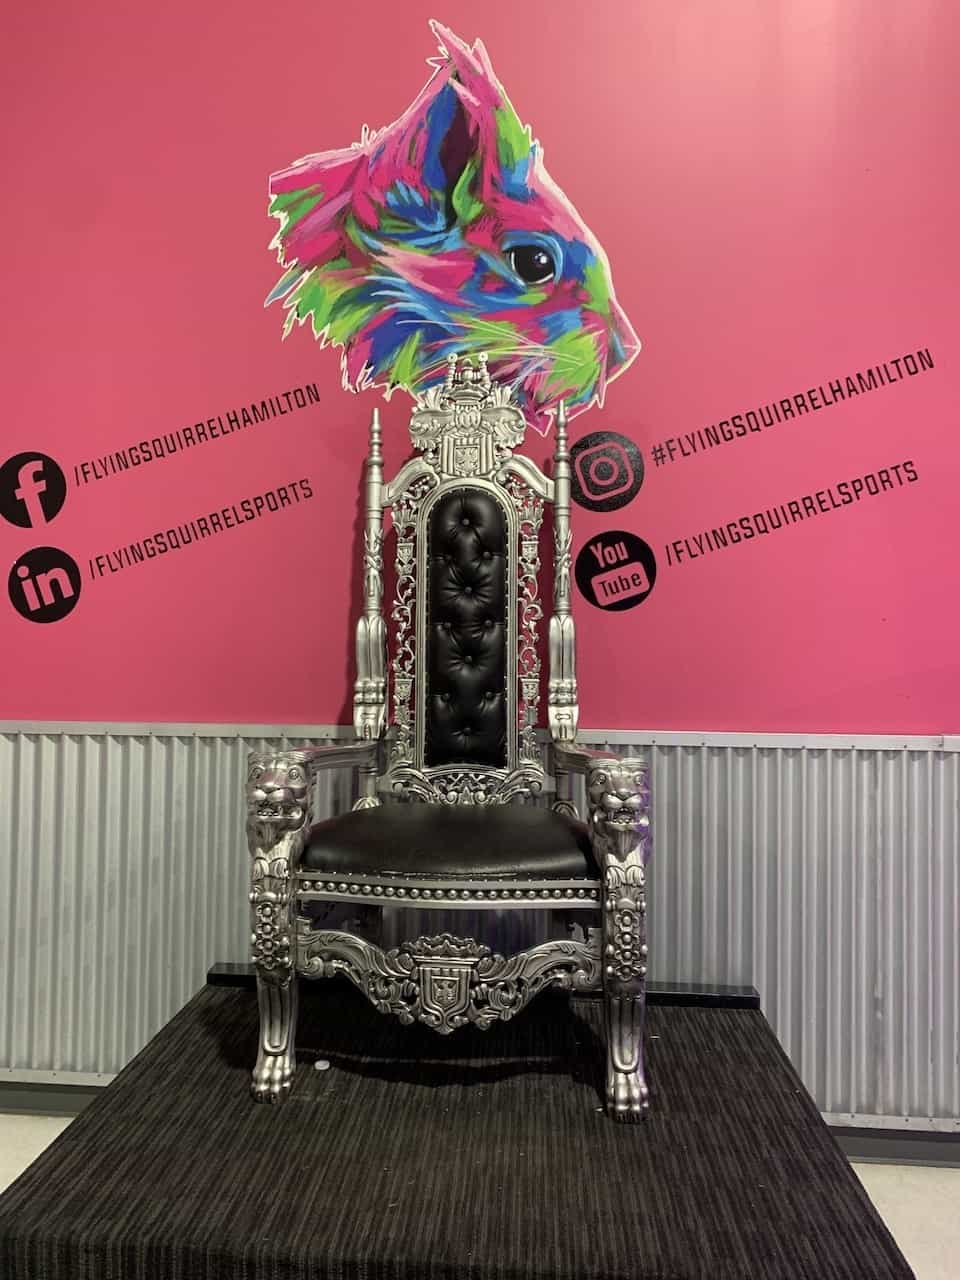 Flying Squirrel Picture Throne in Hamilton Ontario - The Flying Squirrel Throne is a popular spot to take pictures with your group at the Flying Squirrel Indoor Trampoline Park in Hamilton, Ontario.